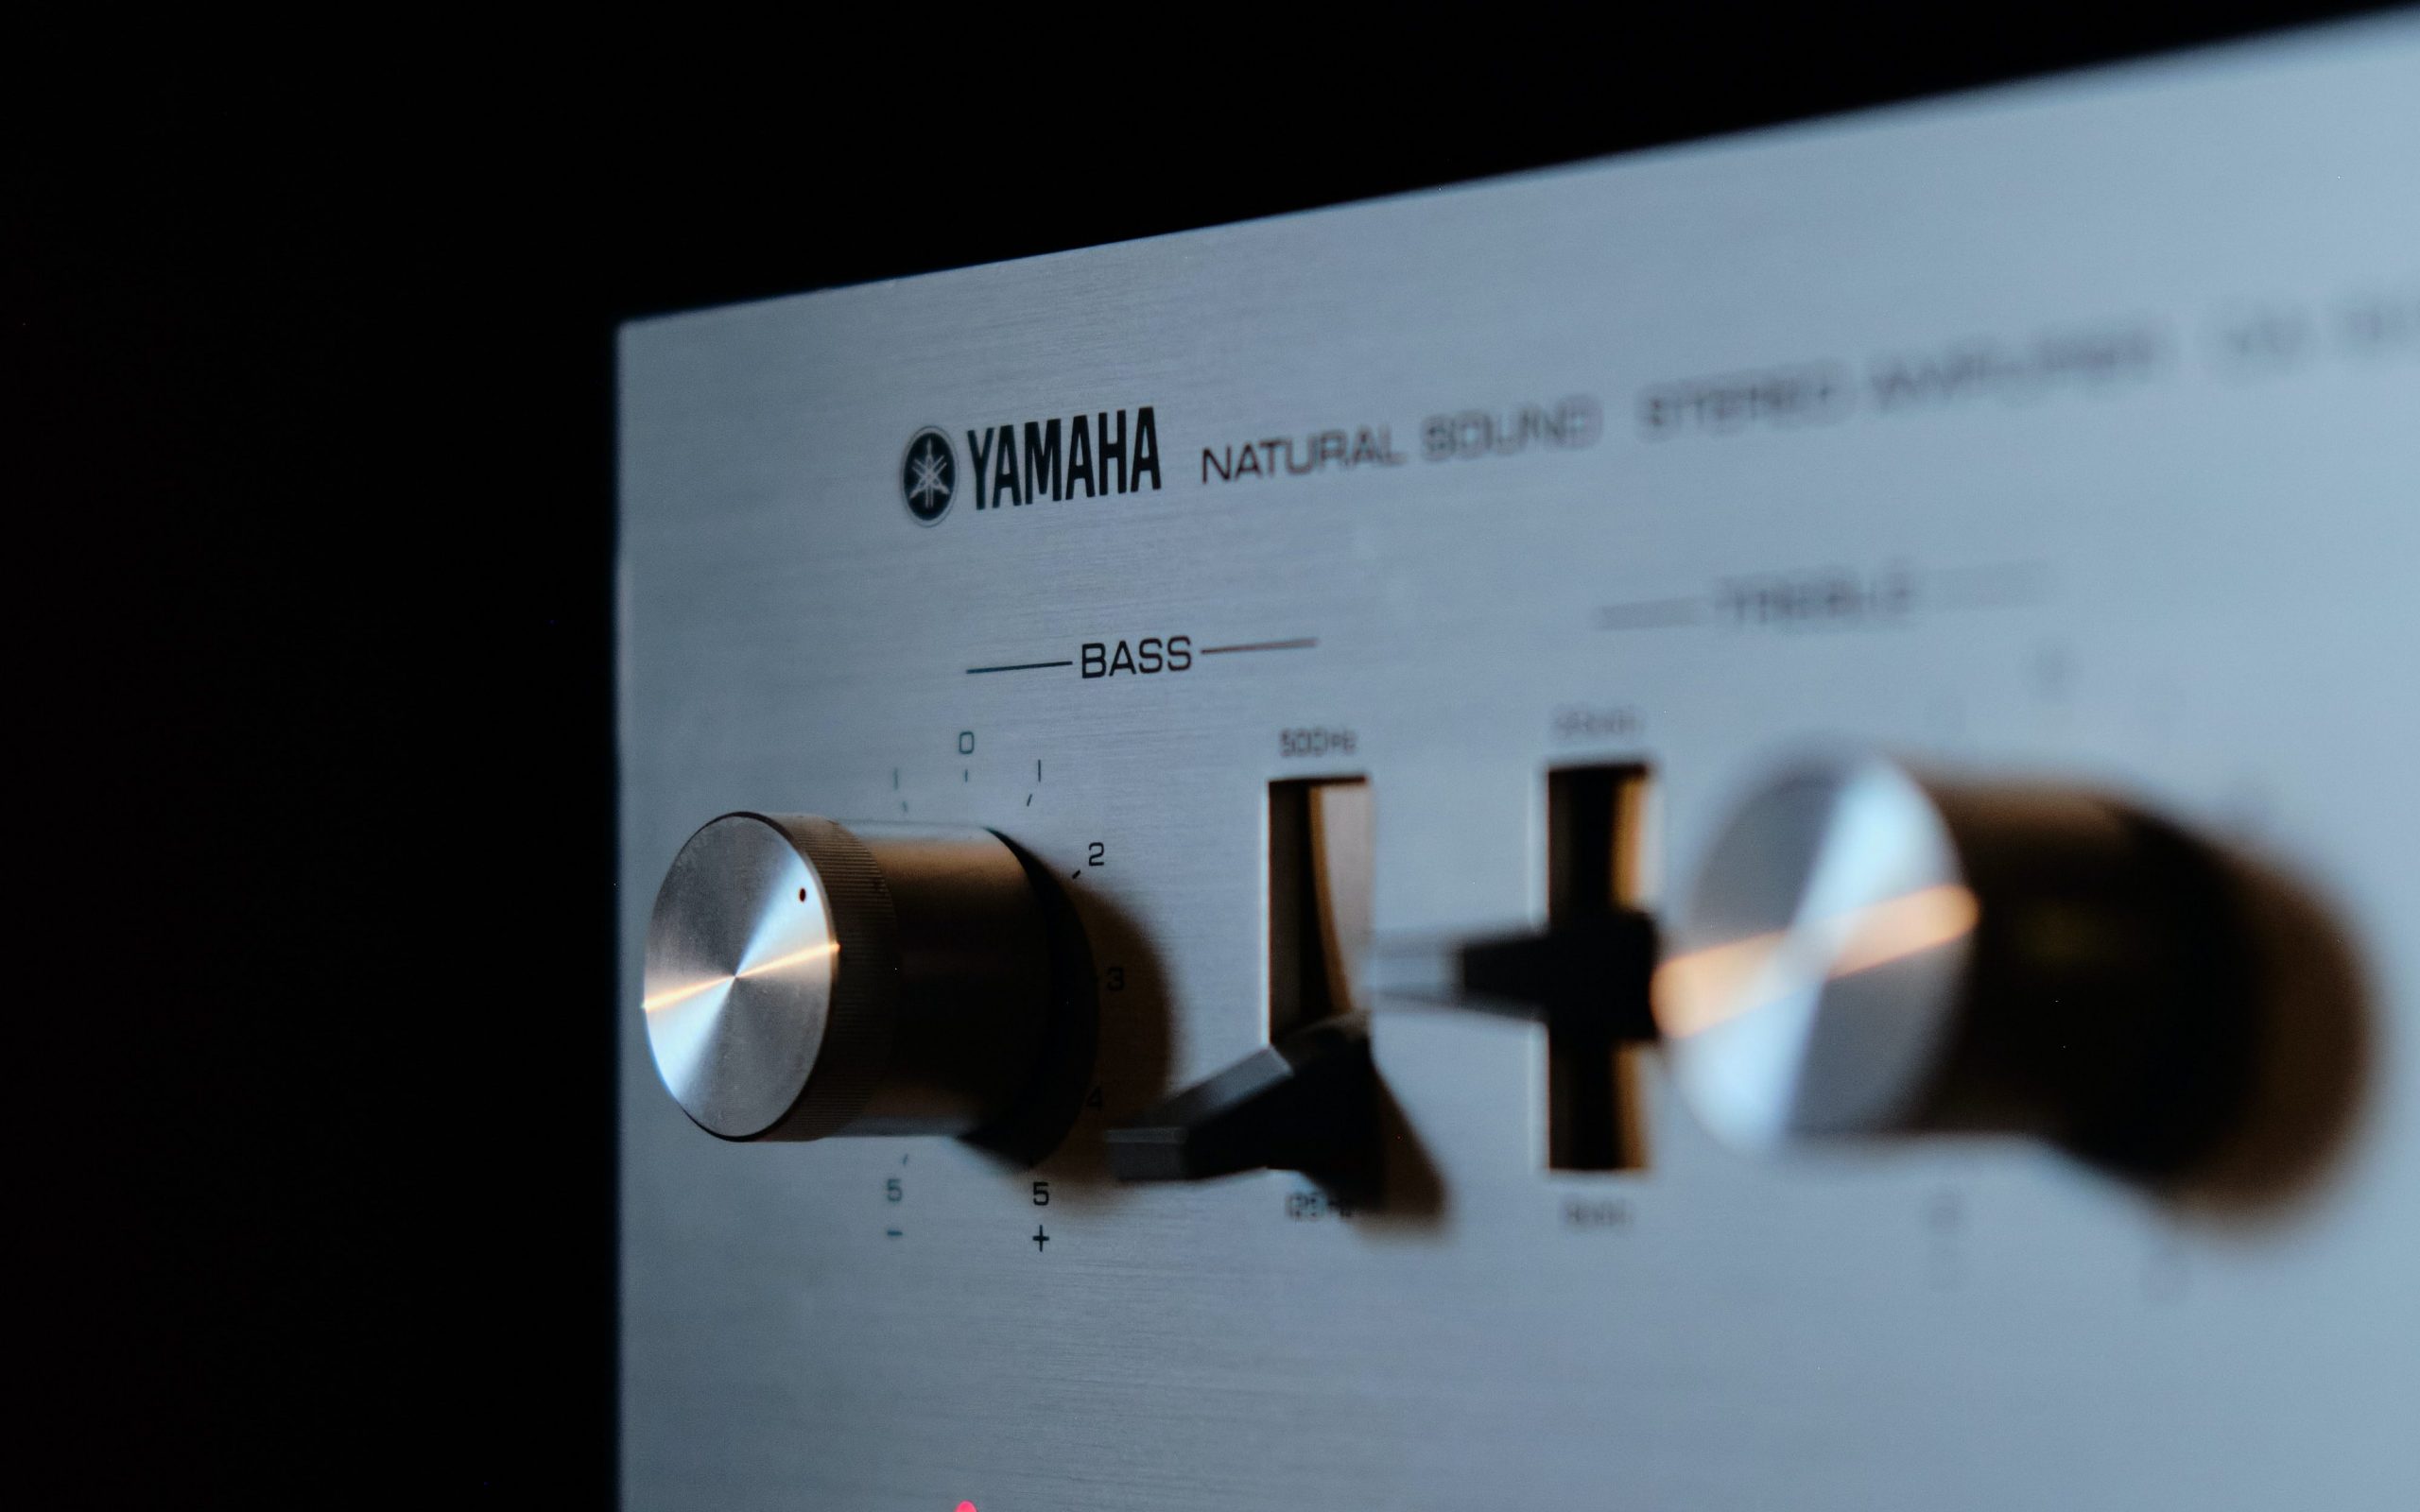 The Yamaha can be one of the best phono preamps under $500.